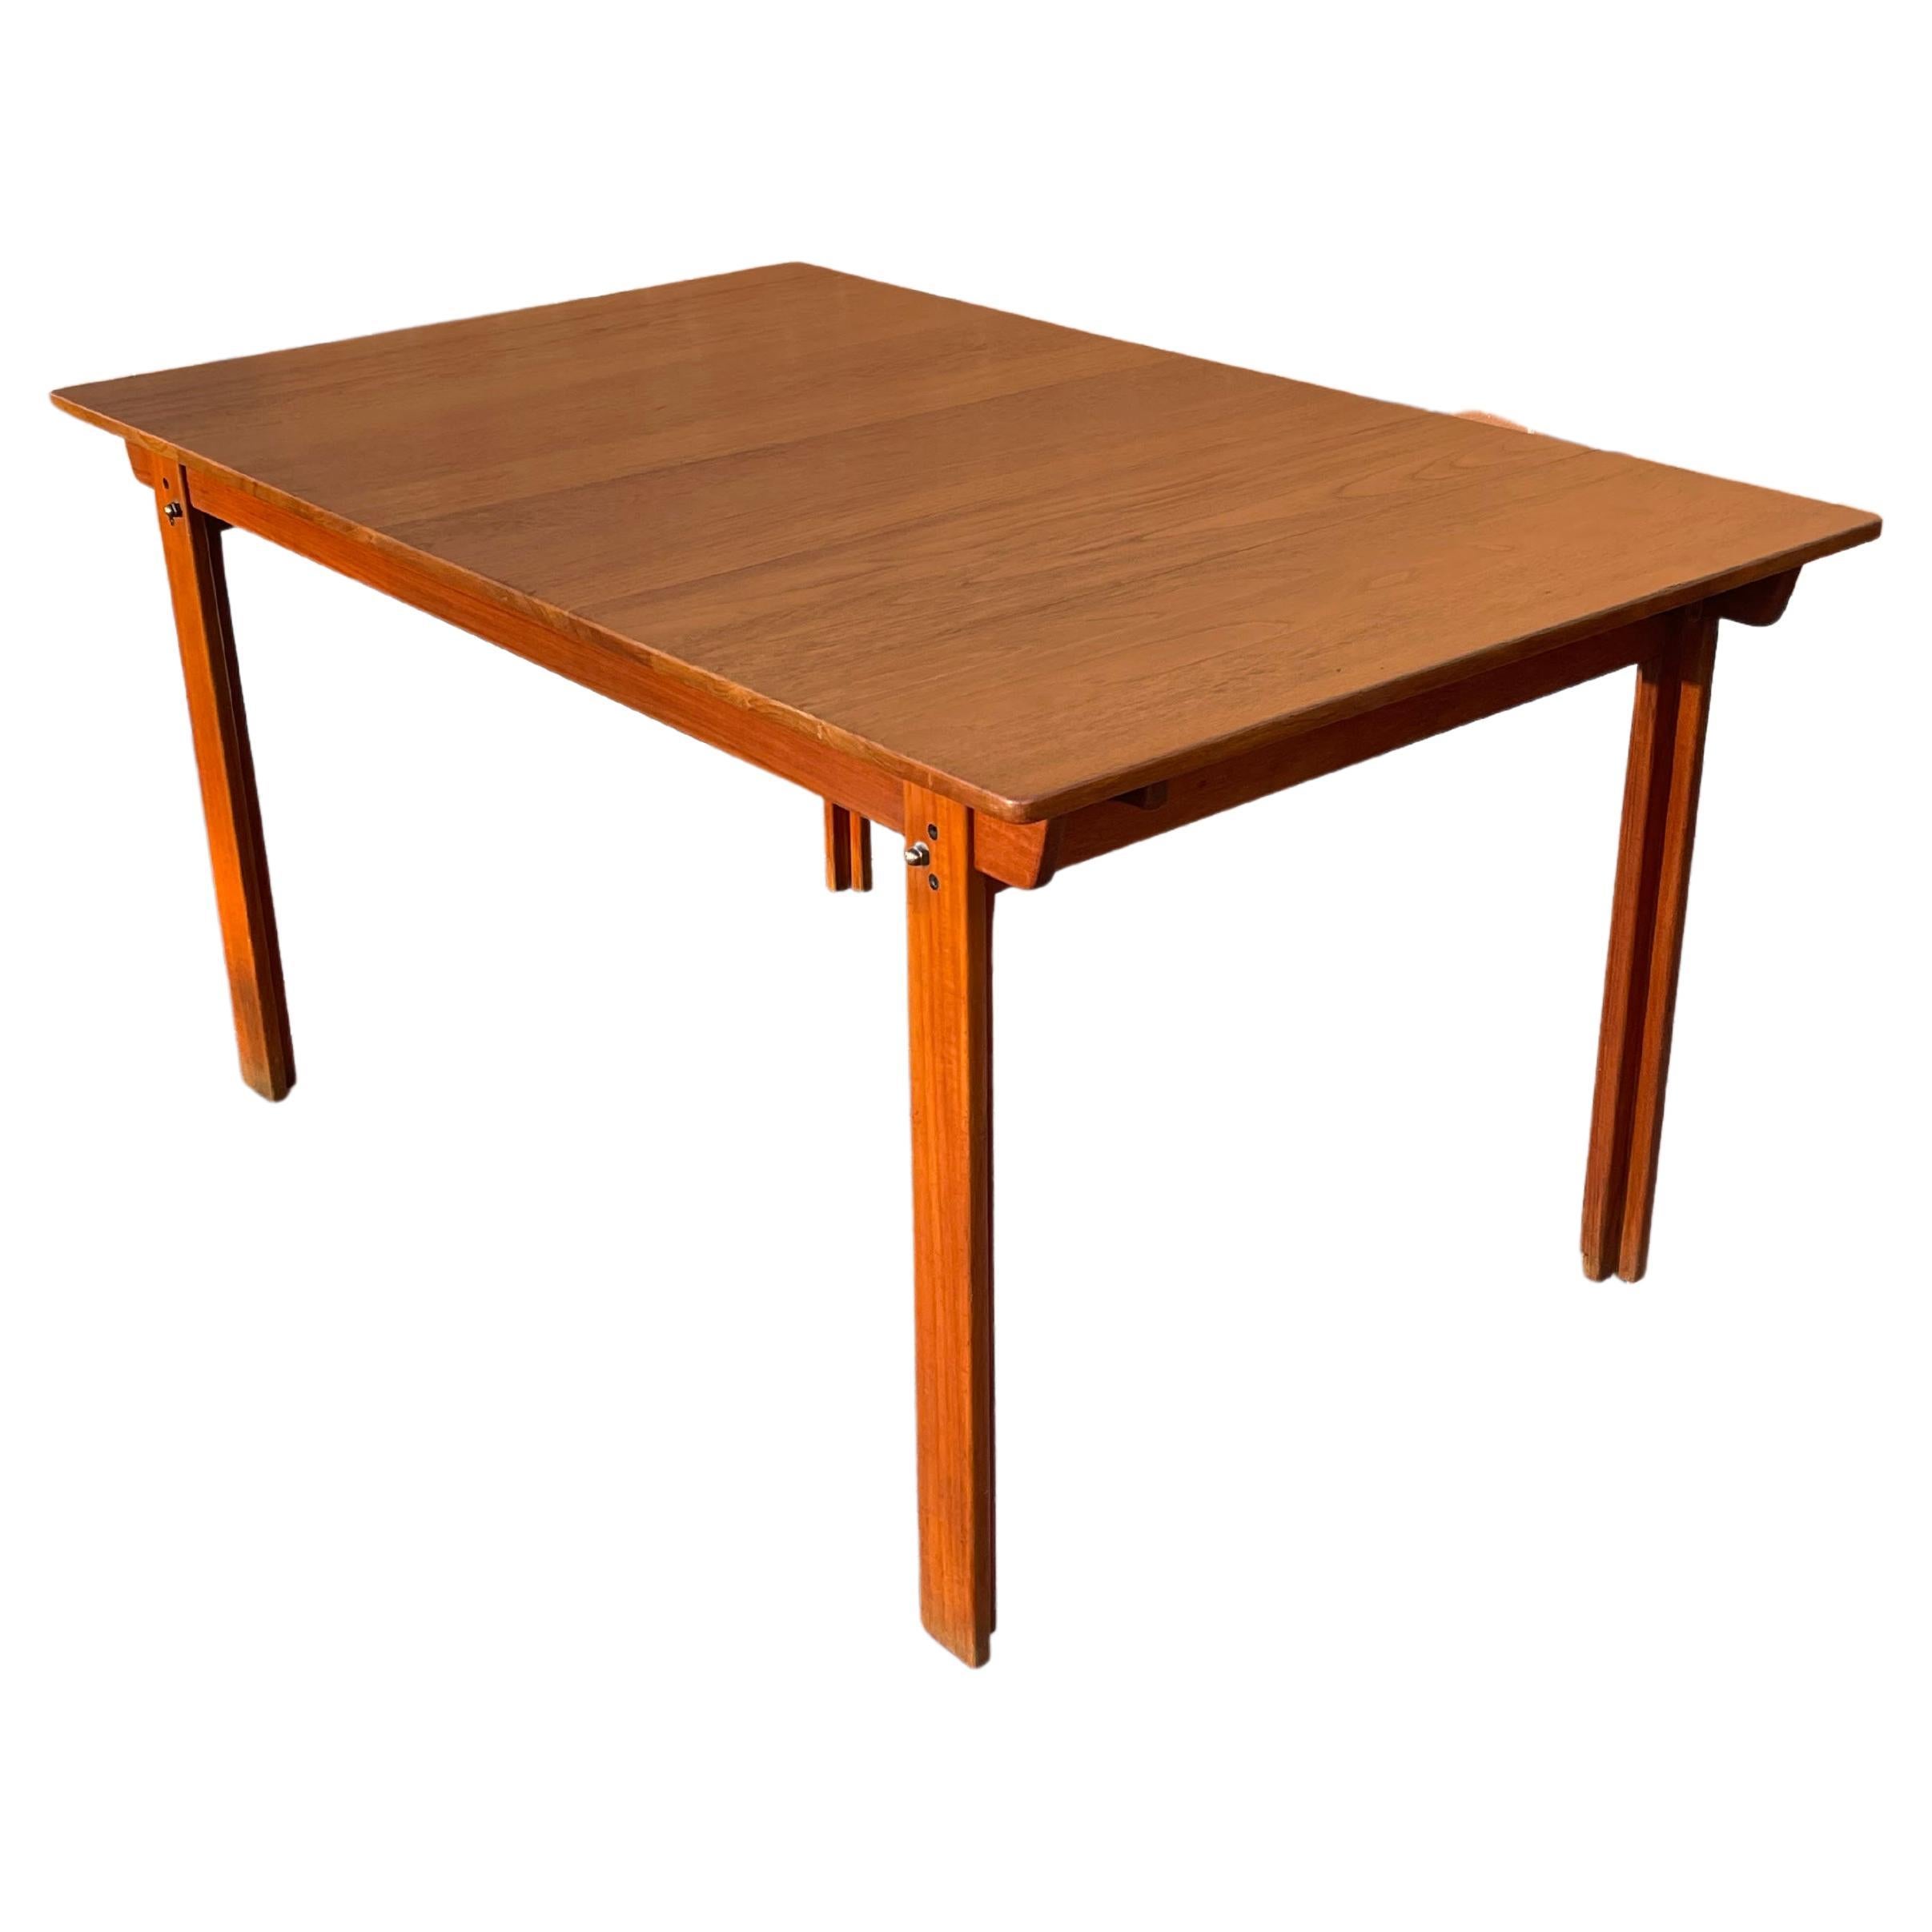 EXTENDING DINING TABLE BY NILS JONSSON FOR HUGO TROEDS, 1960er Jahre